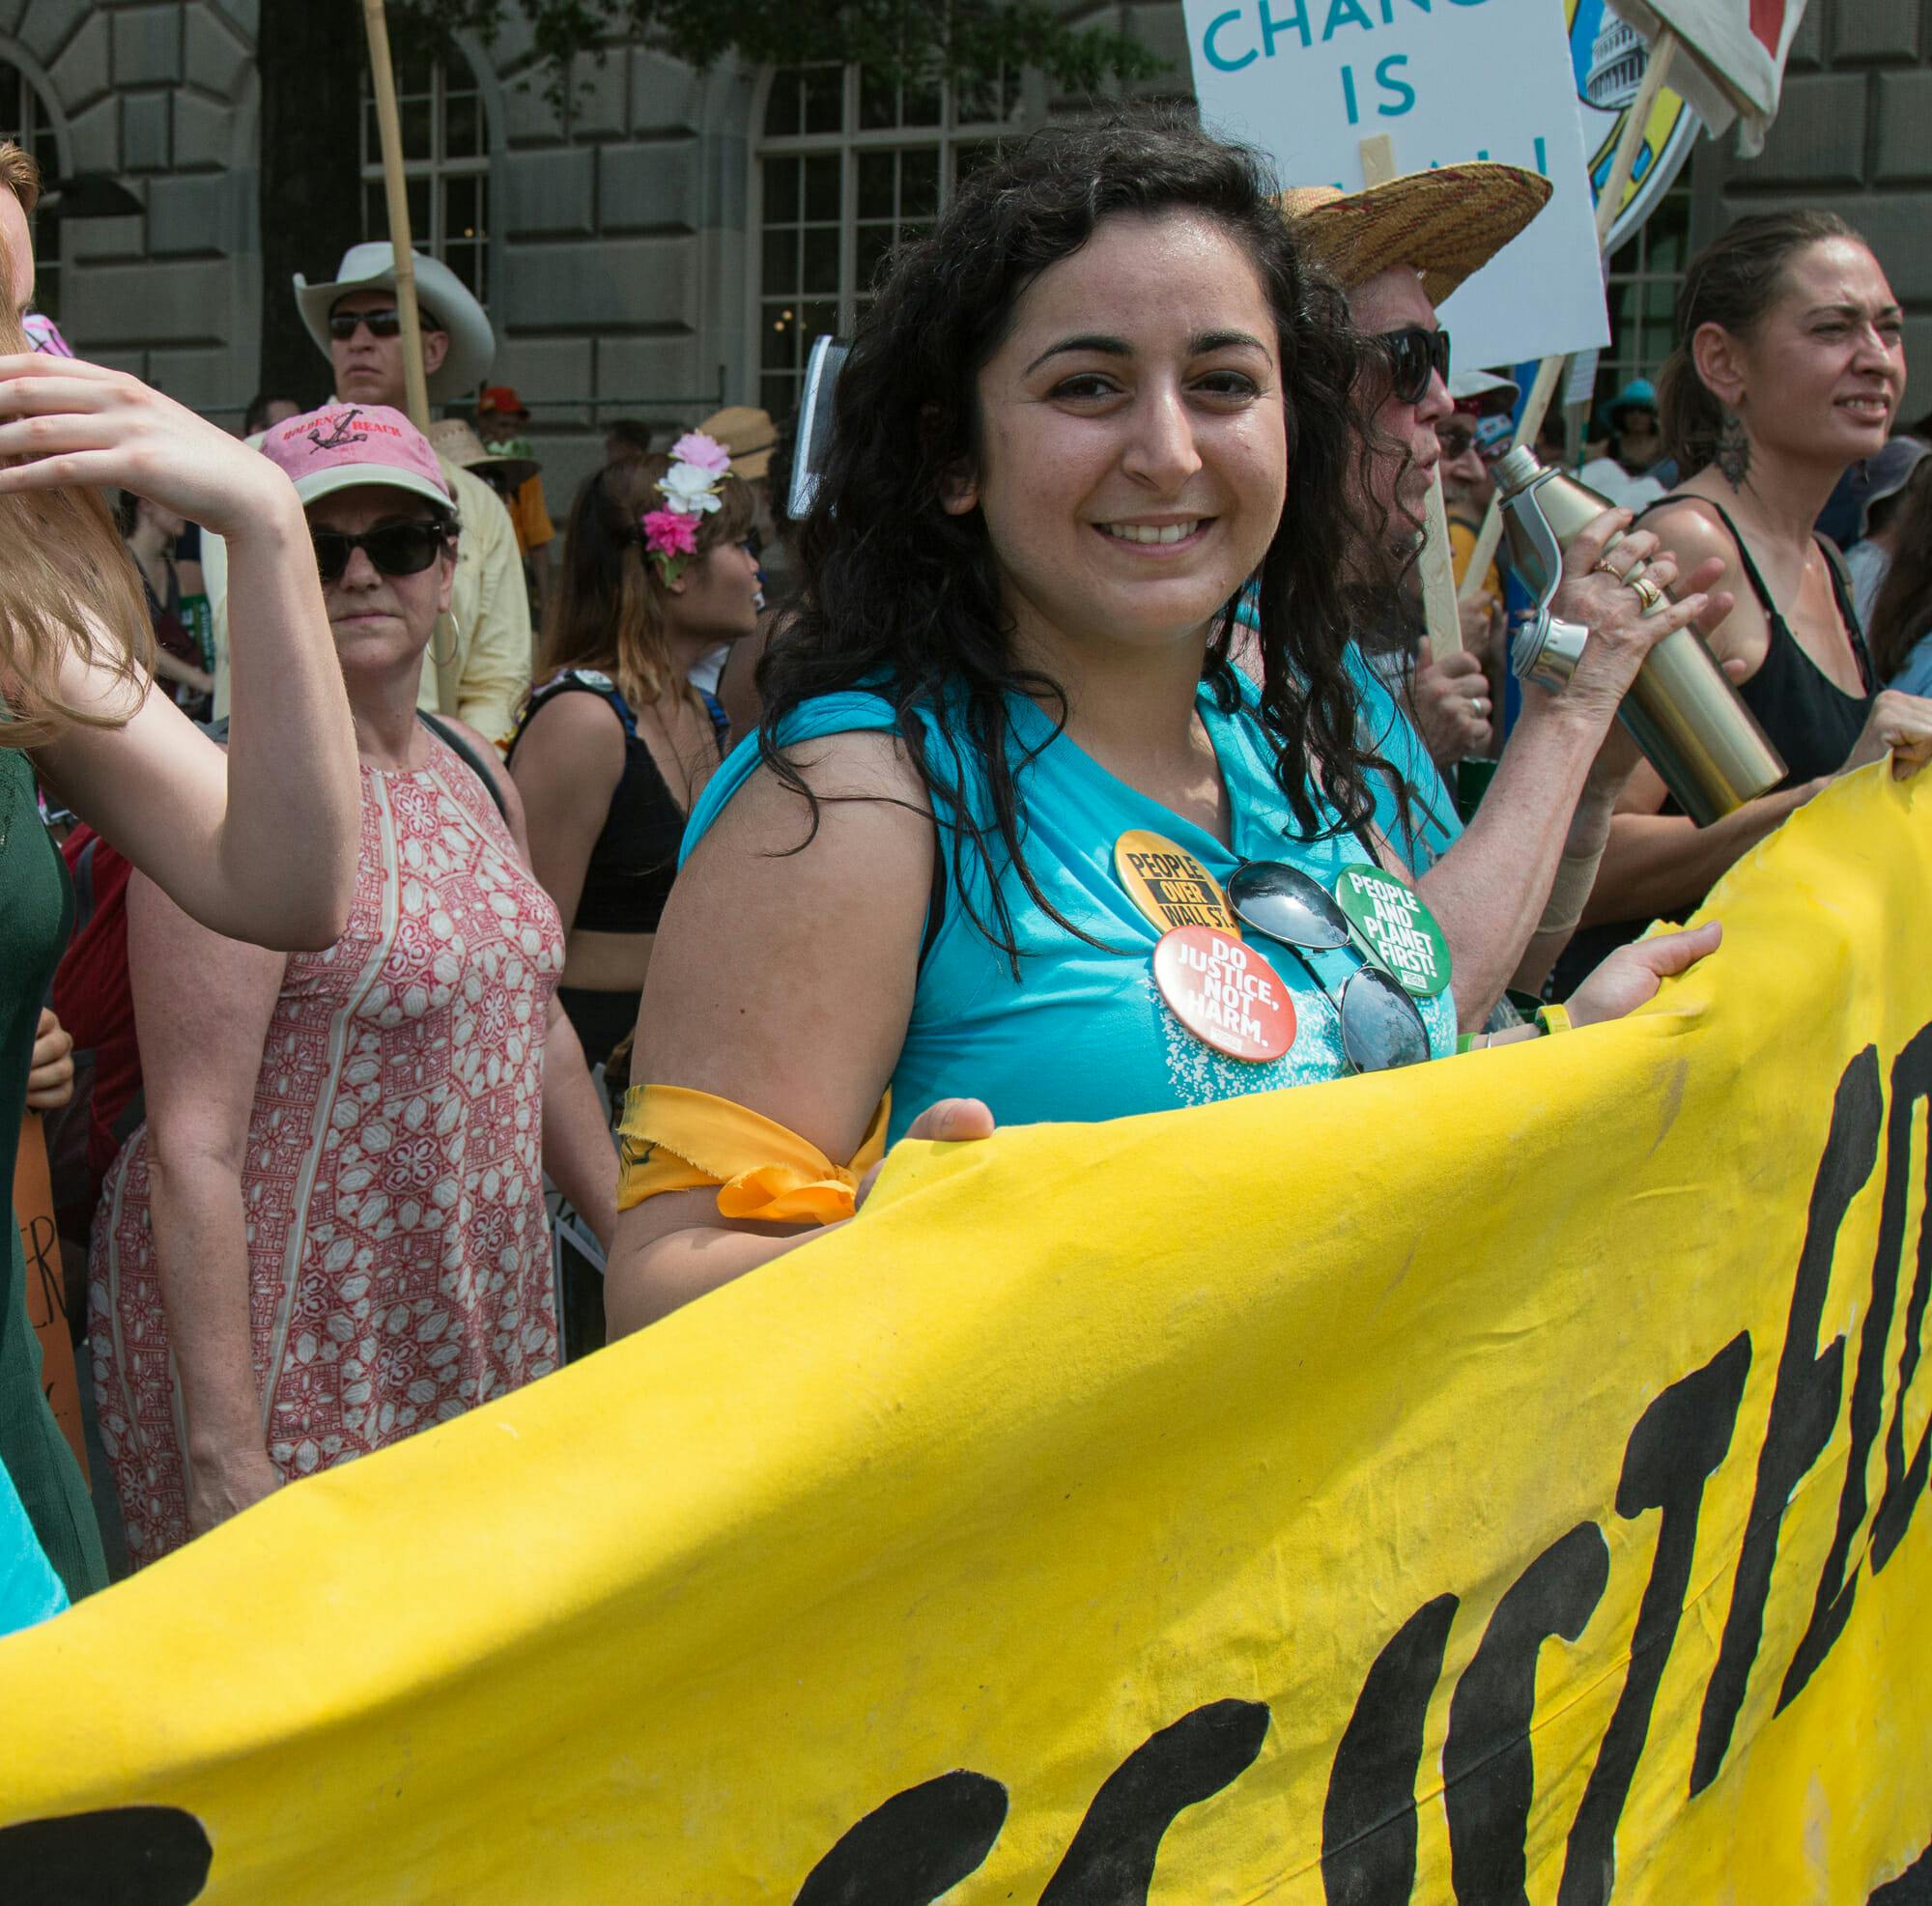 Peoples Climate March